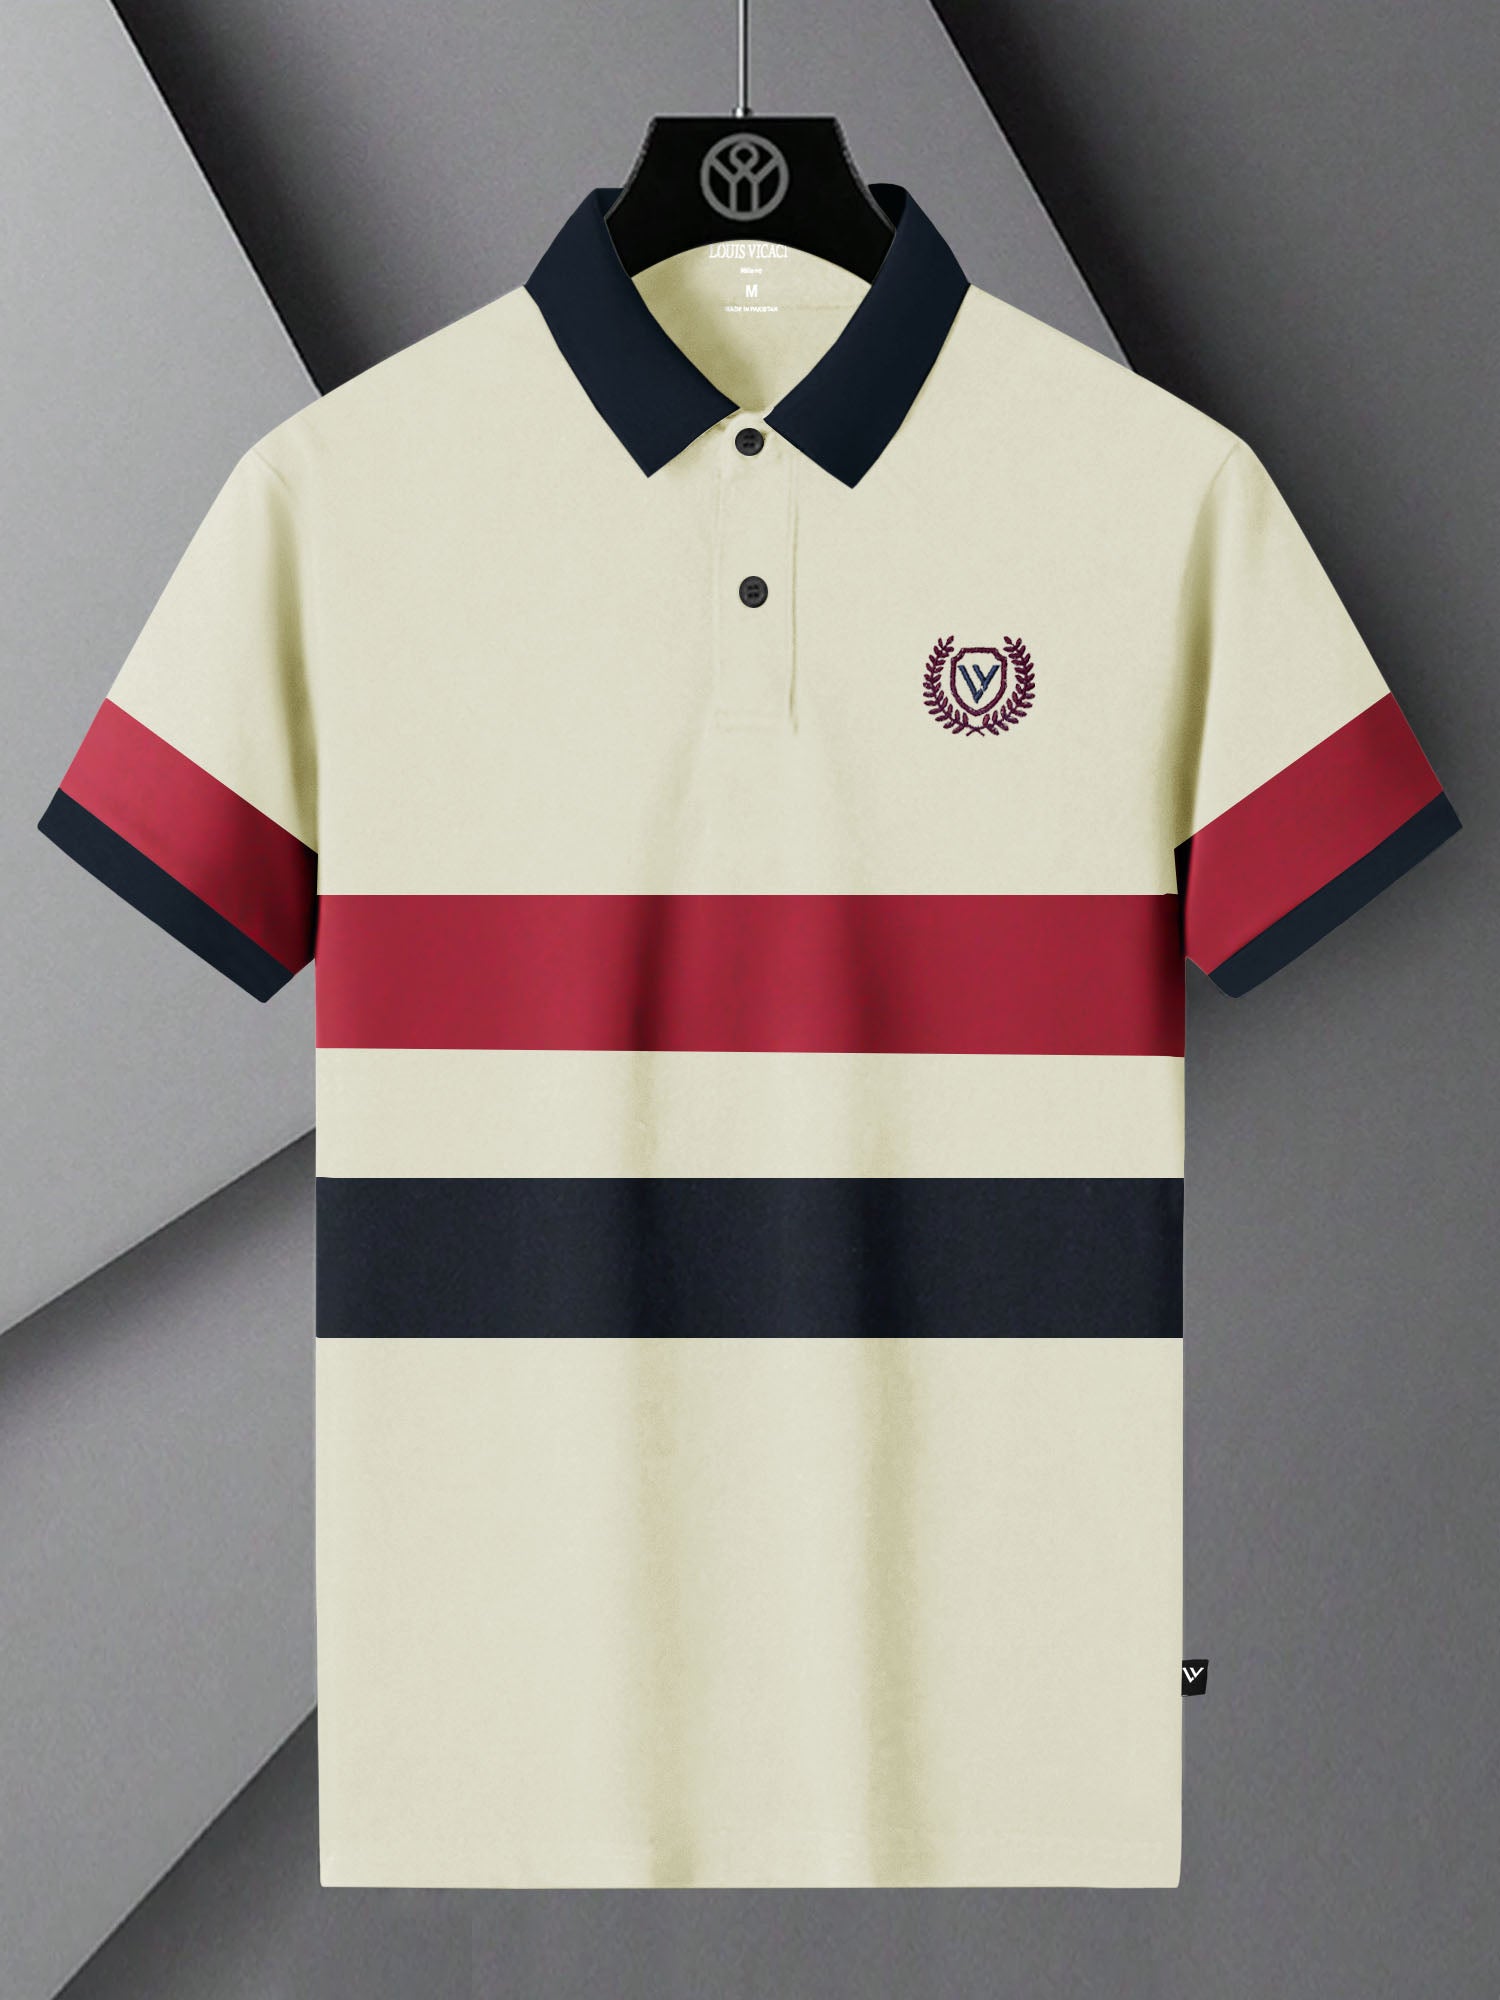 LV Summer Polo Shirt For Men-off White with Stripes-SP1515